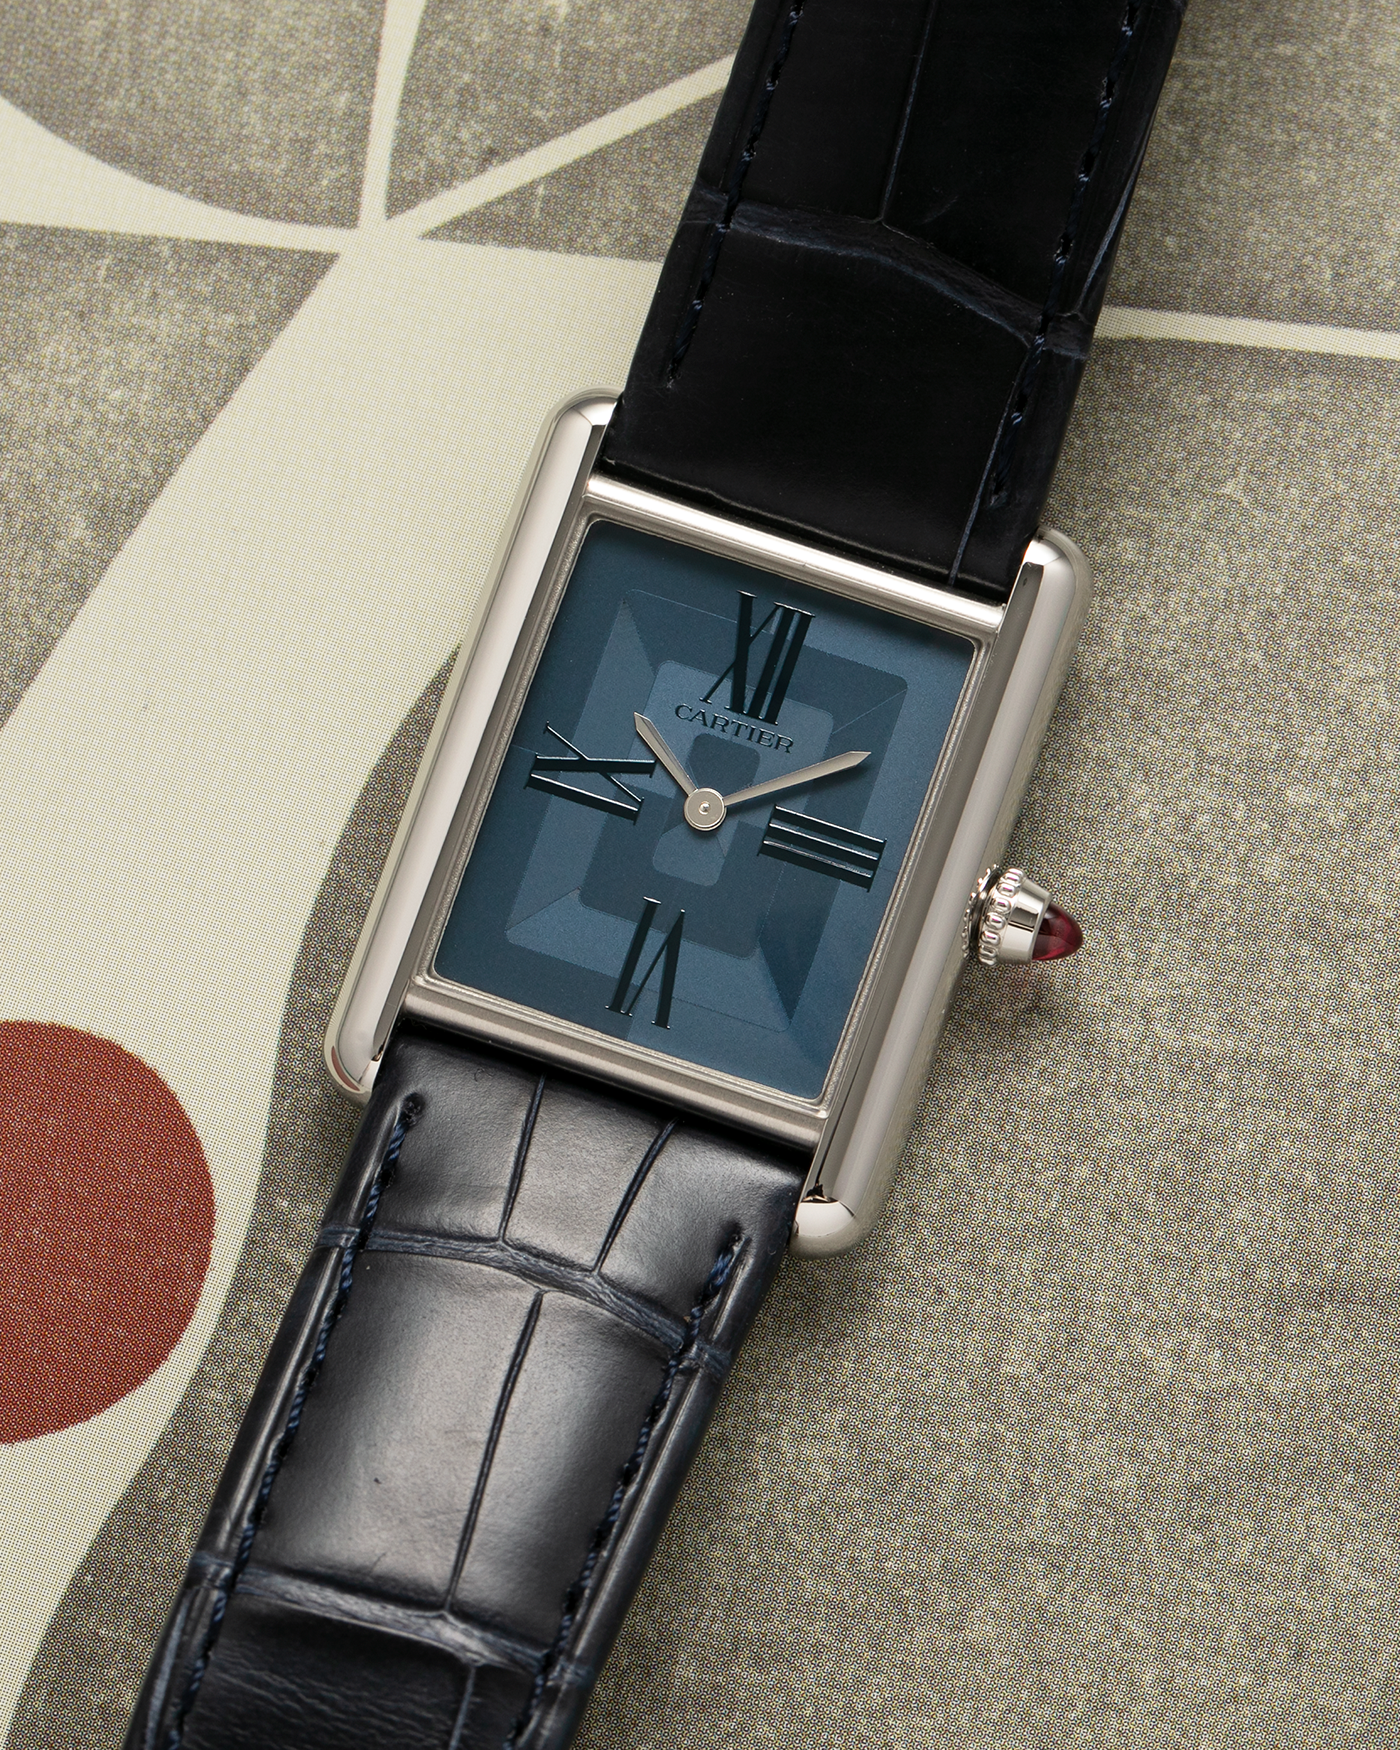 Brand: Cartier Year: 2023 Model: Tank Louis Cartier ‘Europe-only’, Limited Edition of 170 pieces for the European Market Reference: CRWGTA0121 Material: Platinum 950 Movement: Cartier Cal. 1917 MC, Manual-Winding Case Dimensions: 25.5mm x 33.7mm Lug Width: 19mm Strap: Cartier Black Calf Leather Strap with Signed Platinum 950 Tang Buckle